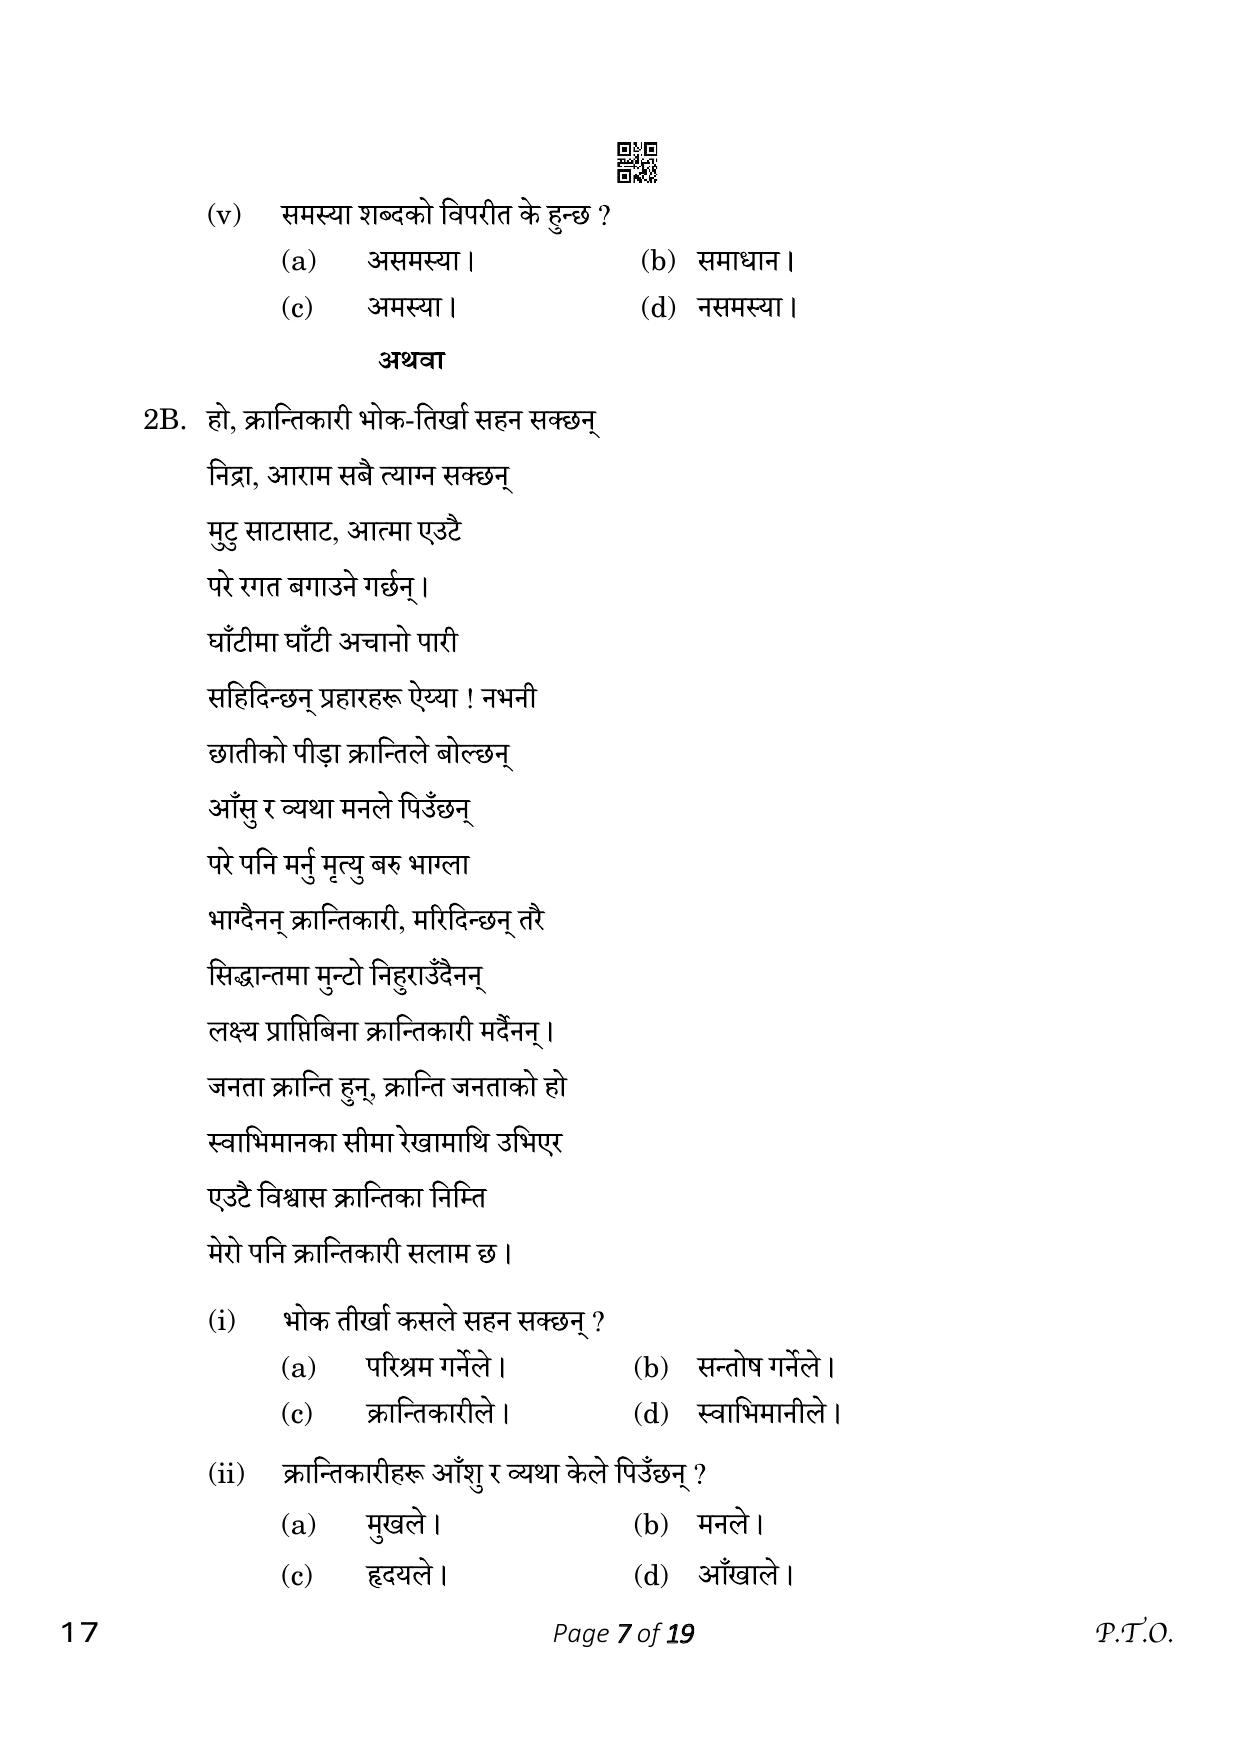 CBSE Class 10 Nepali (Compartment) 2023 Question Paper - Page 7